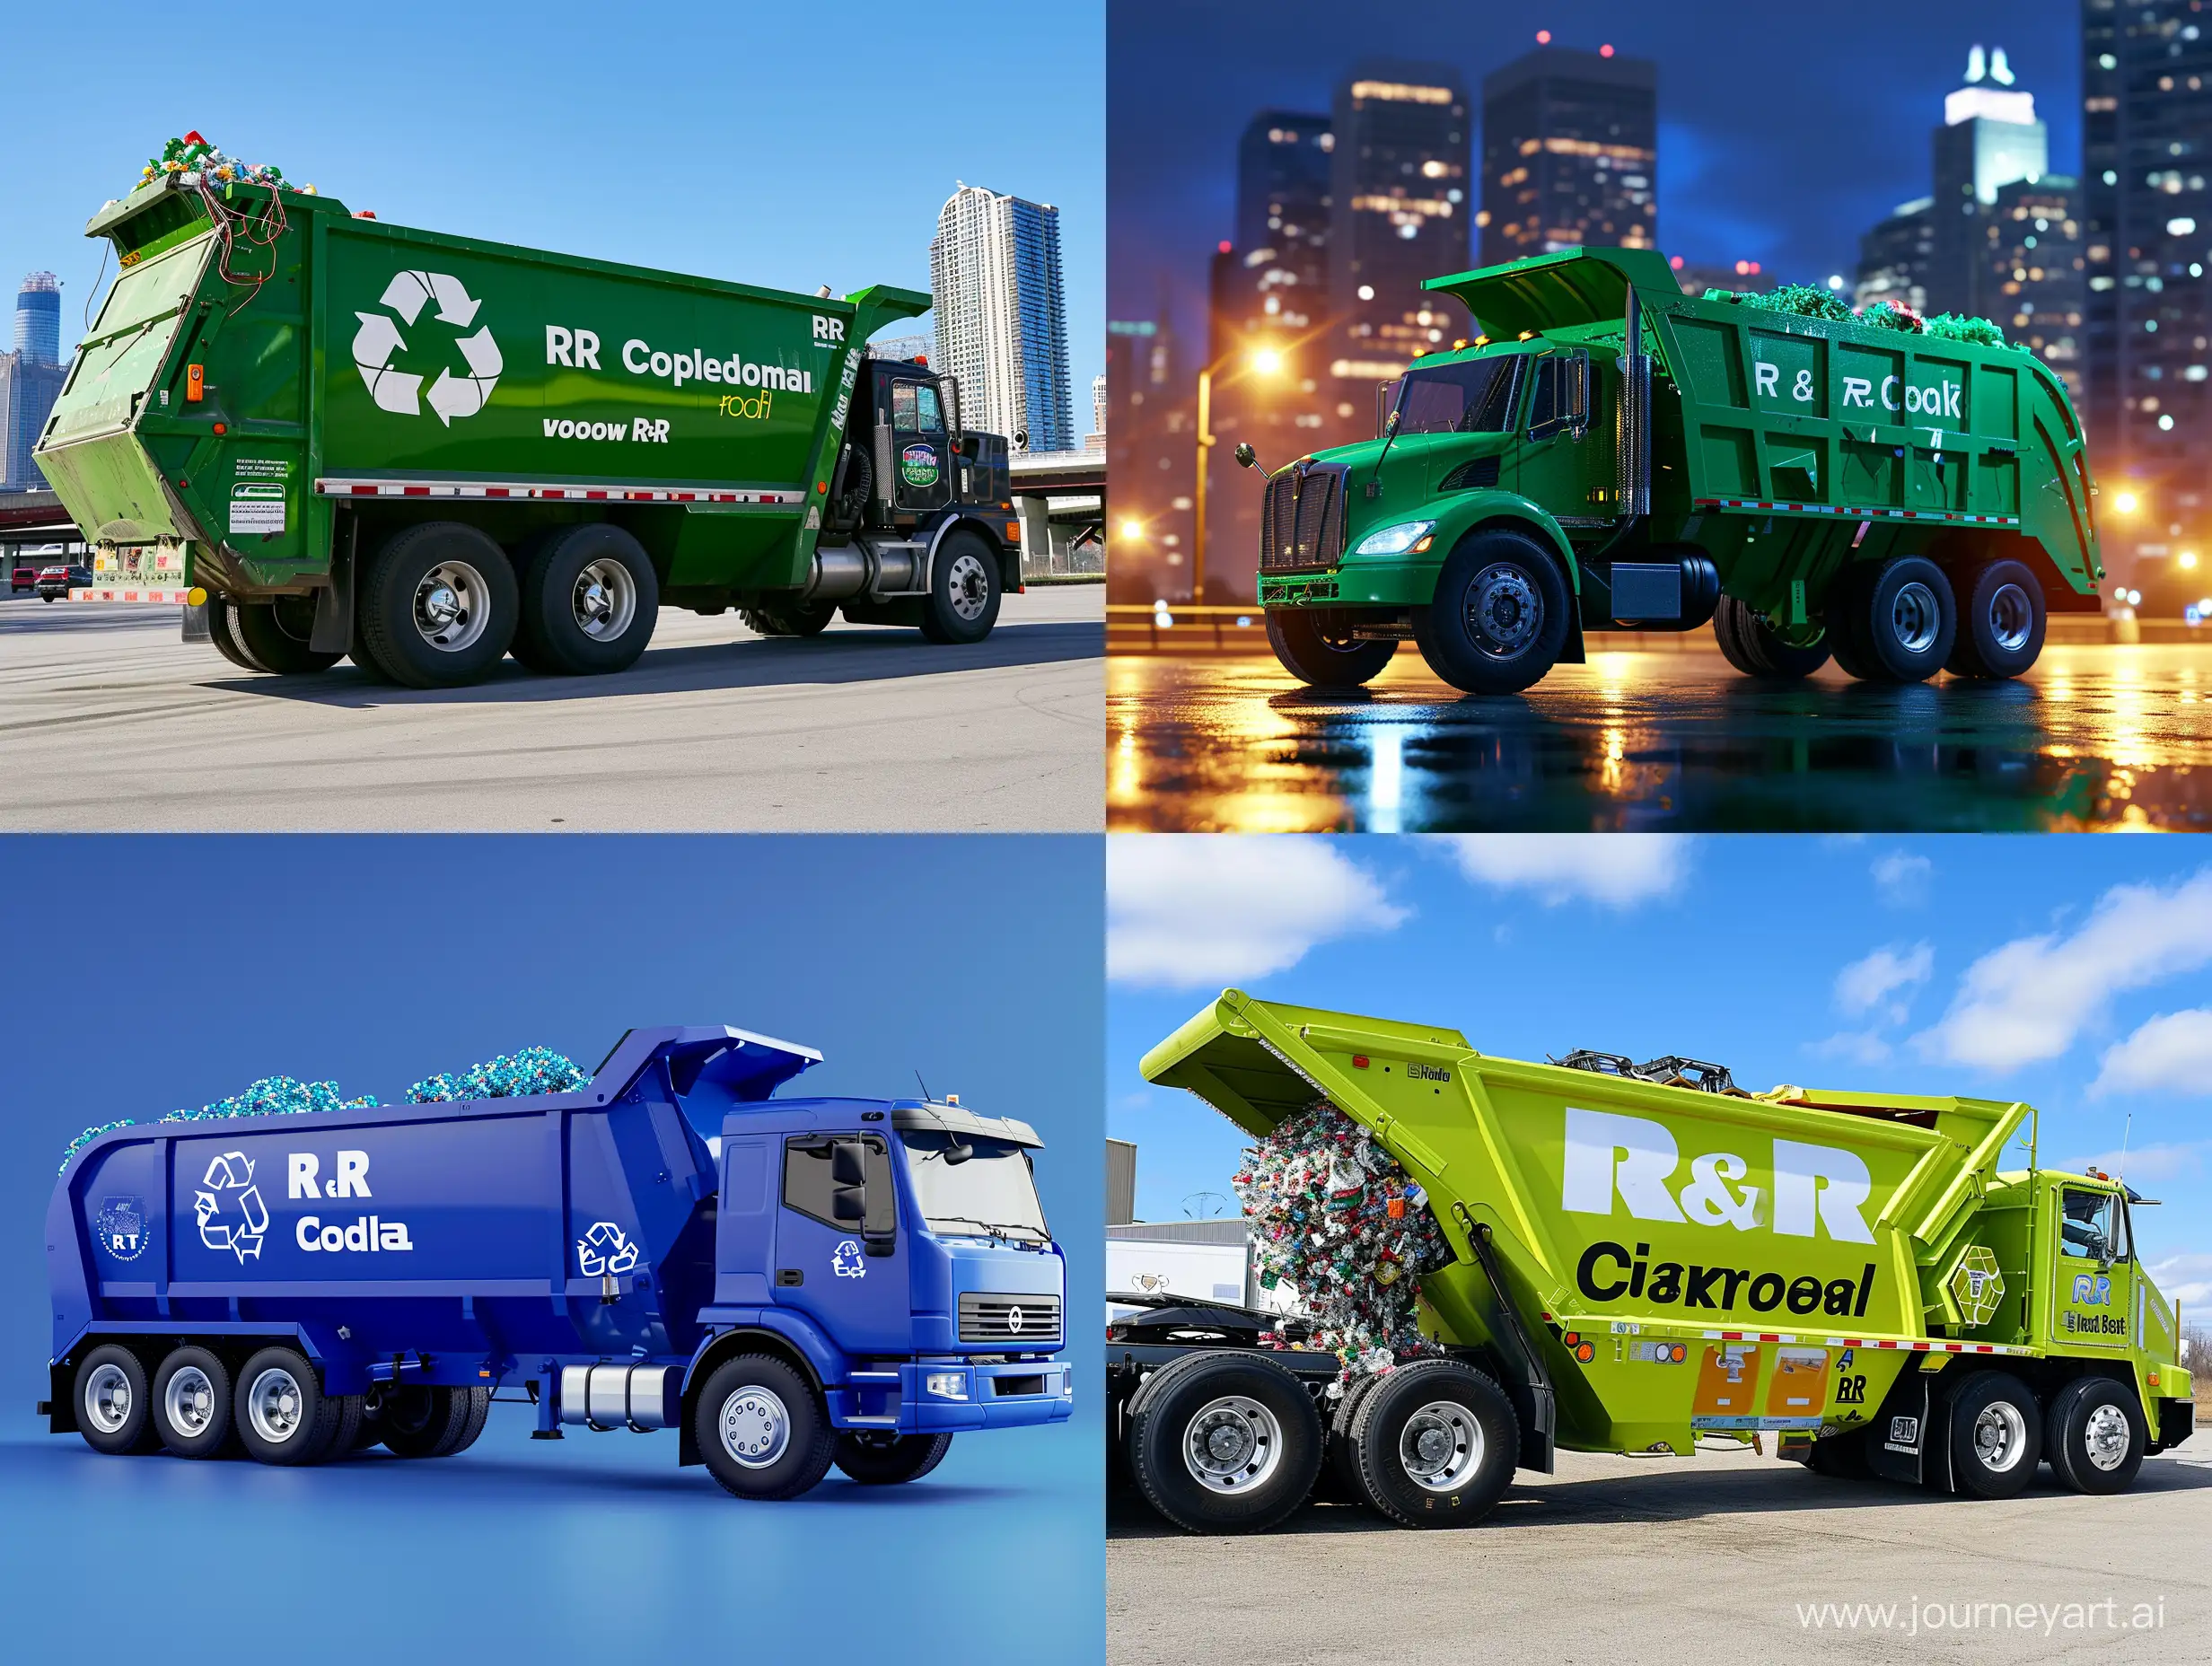 Futuristic-Cyber-City-Background-with-RR-Recycling-Food-Waste-Company-and-Recycling-Truck